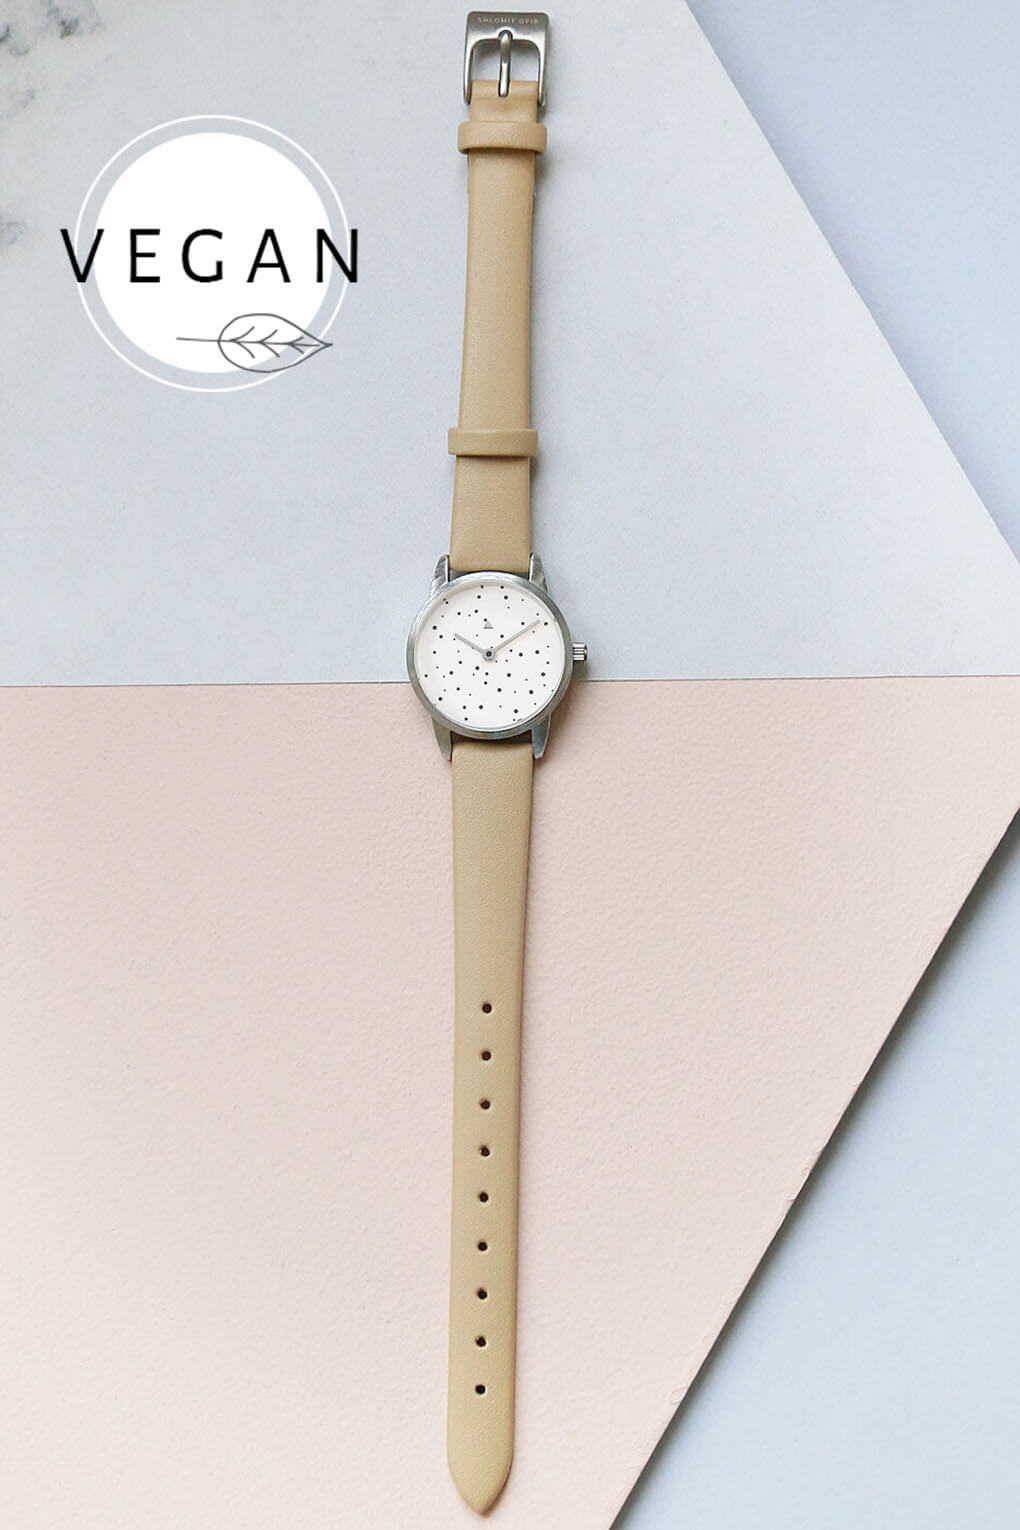 25 mm silver watch with dots - VEGAN